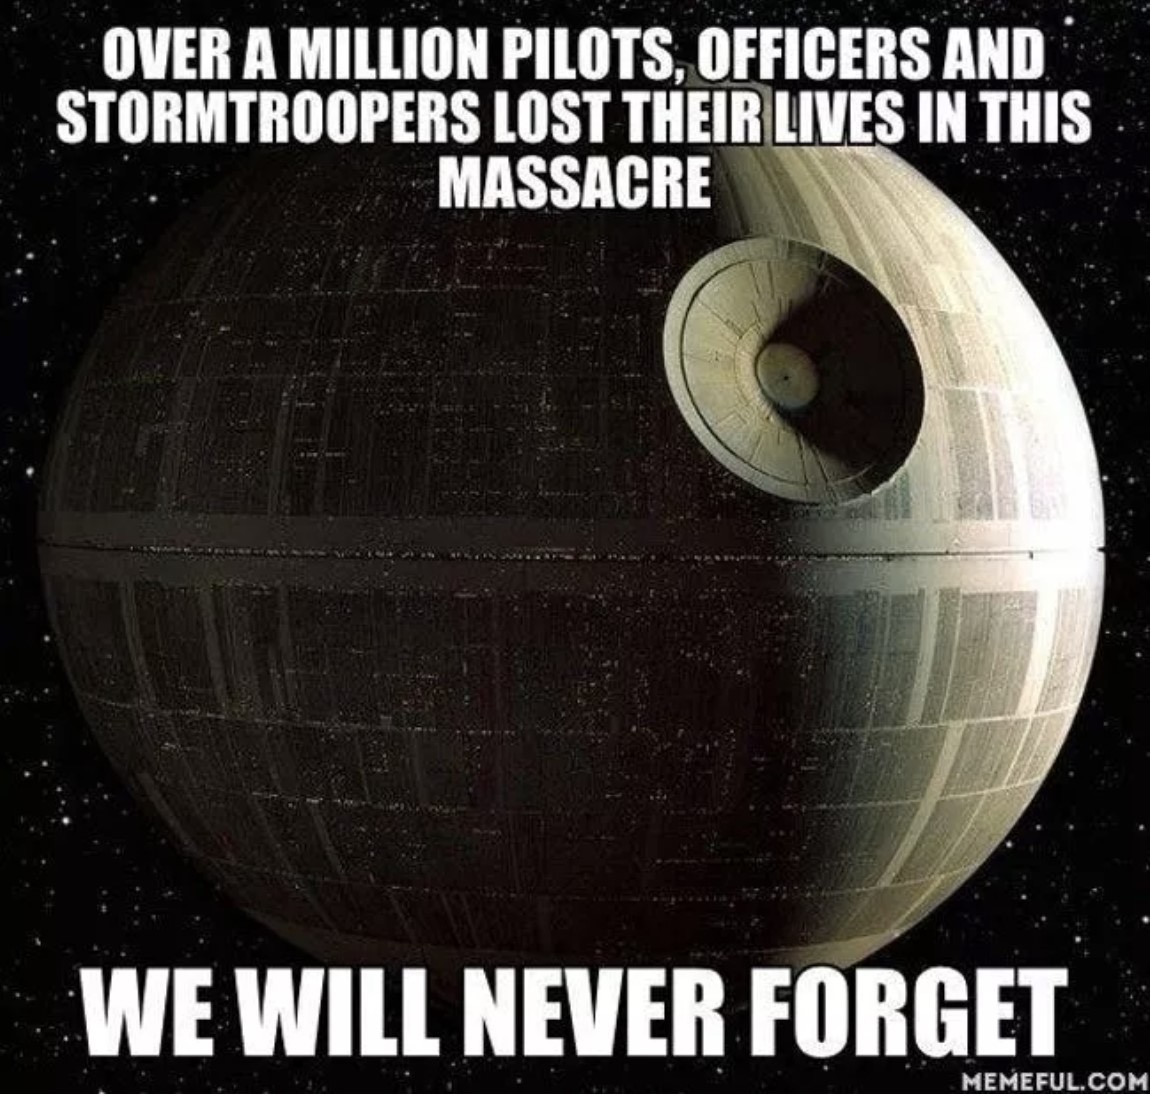 ewing global - Over A Million Pilots, Officers And Stormtroopers Lost Their Lives In This Massacre We Will Never Forget Memeful.Com